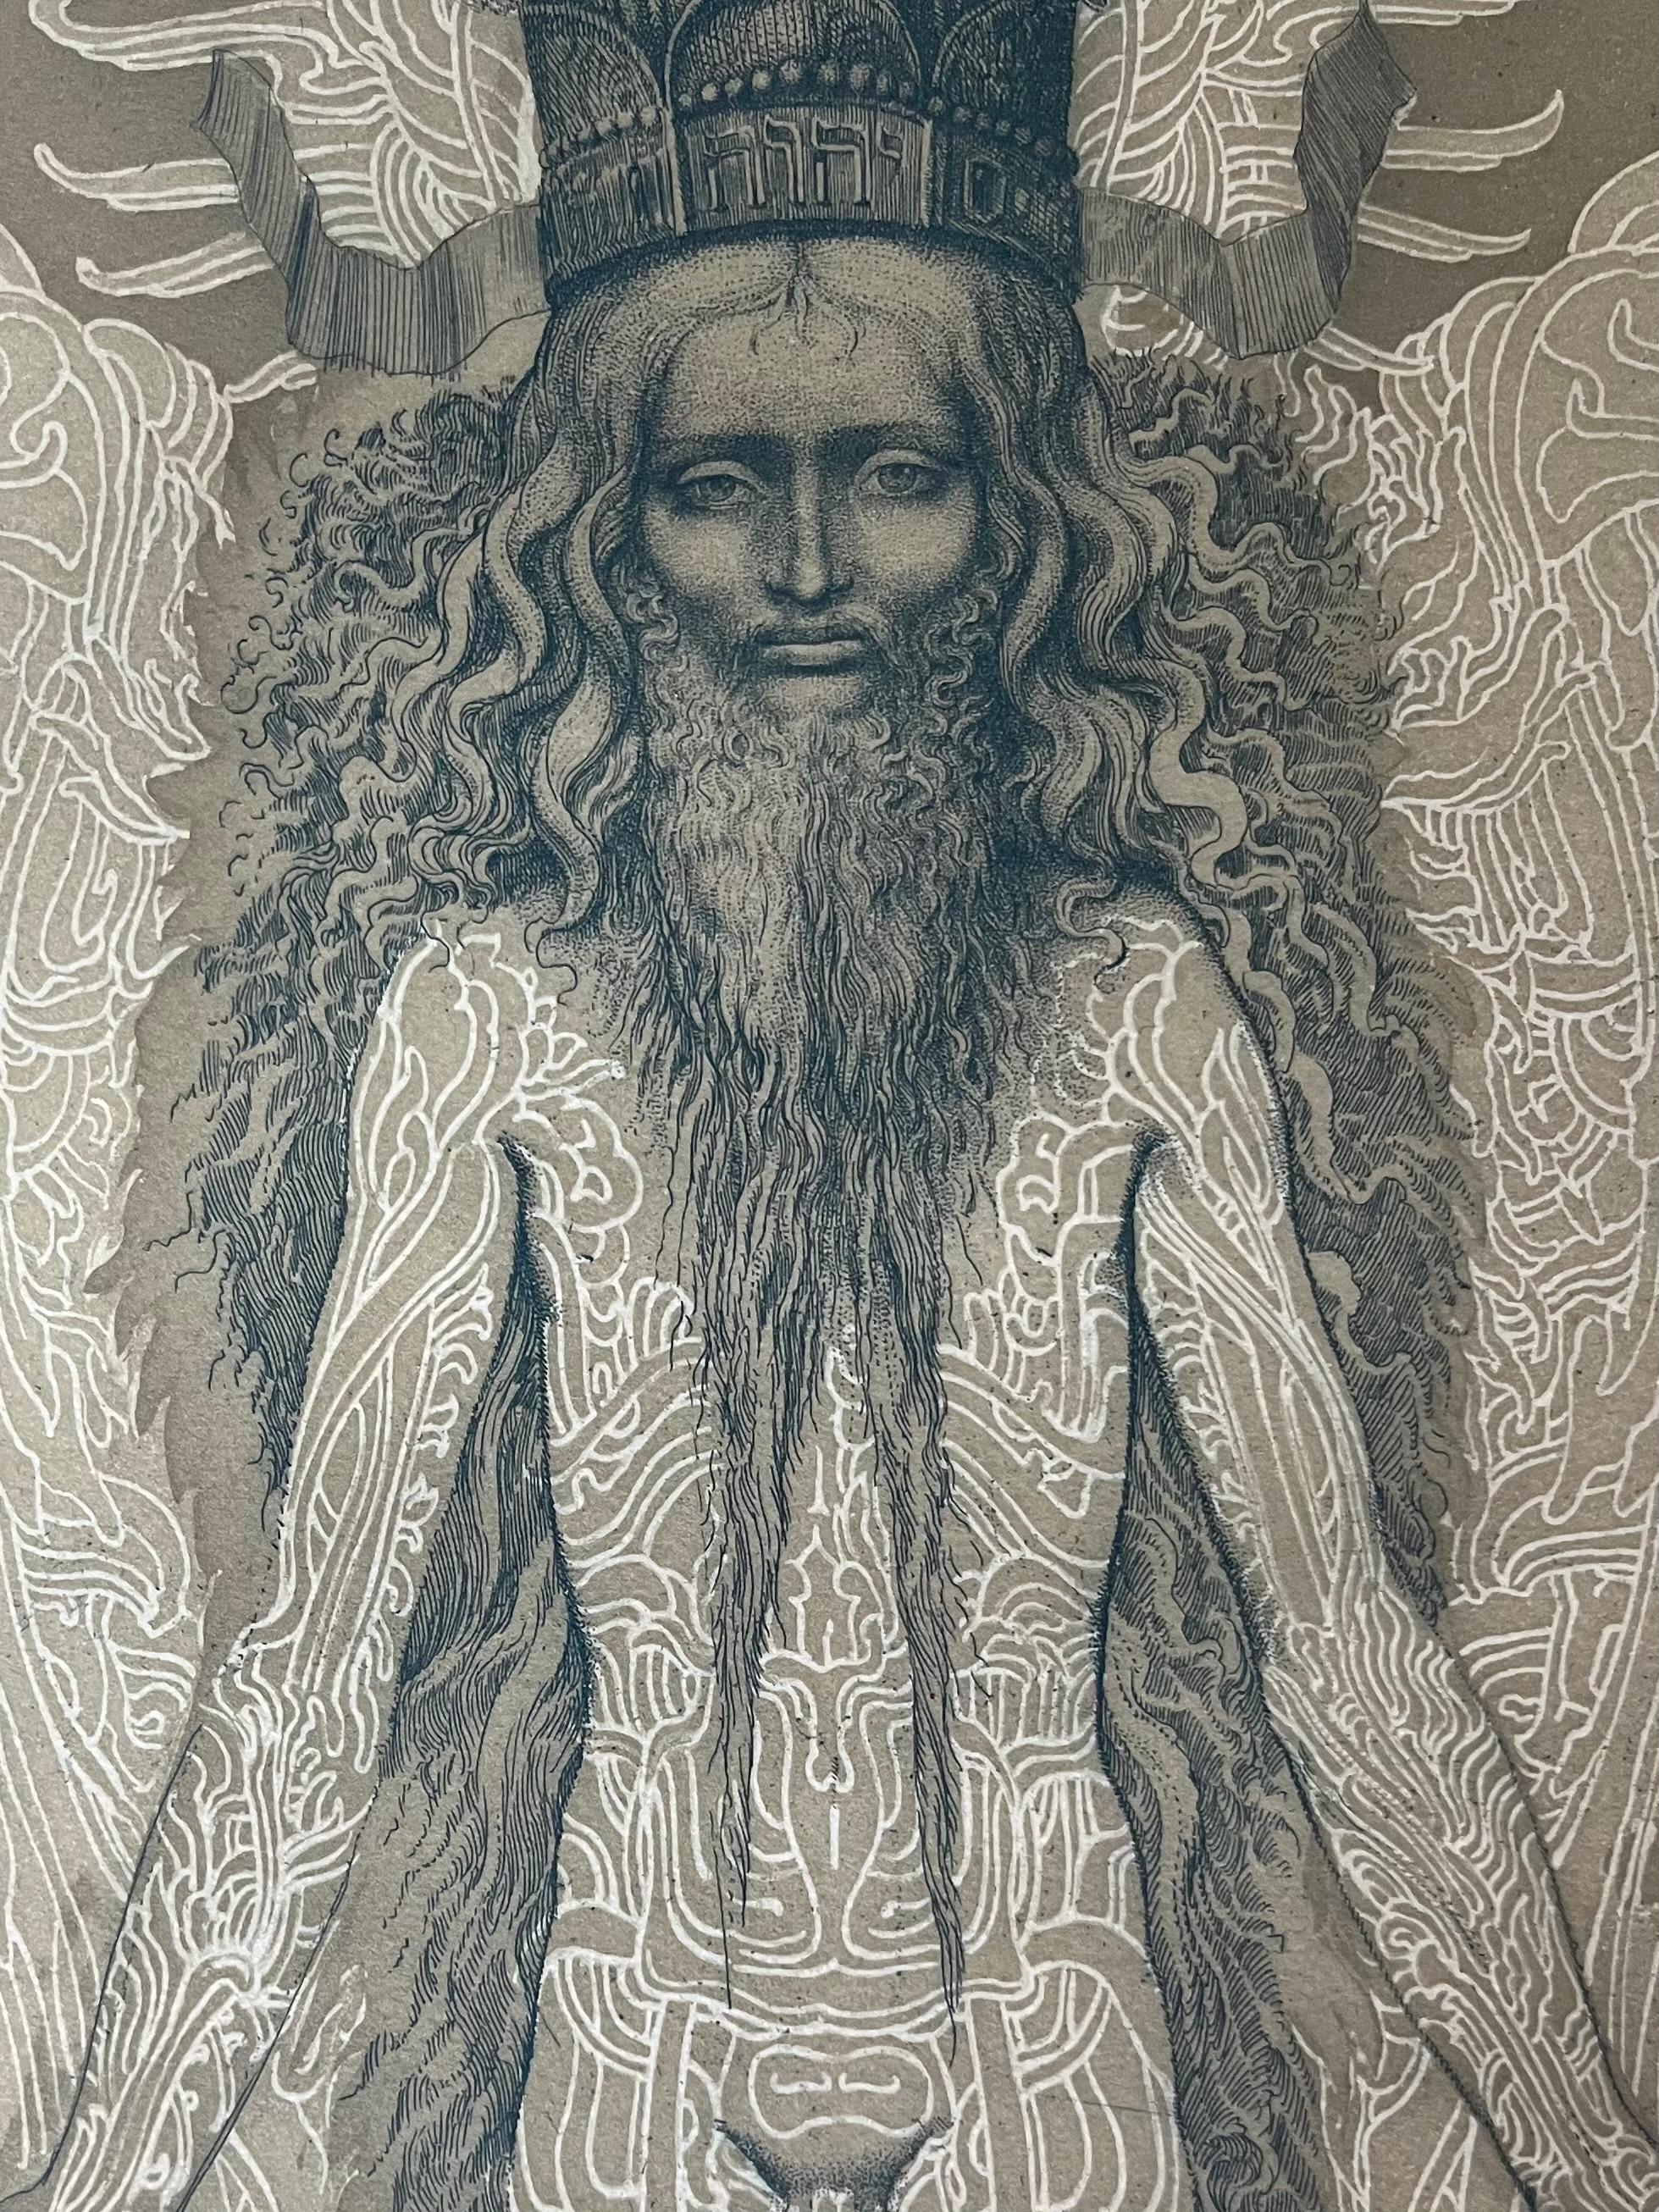 Original engraving #3 by Ernst FUCHS from Kabbalah (THIRTY-TWO PATHS OF WISDOM by SEFER YETZIRA), 1978
Etching signed and numbered 16/30 E.A.
Page size - 30 x 22 in  76 x 56 cm
Image size - 21 x 12.50 in x 53 x 32 cm

This collector's piece, printed